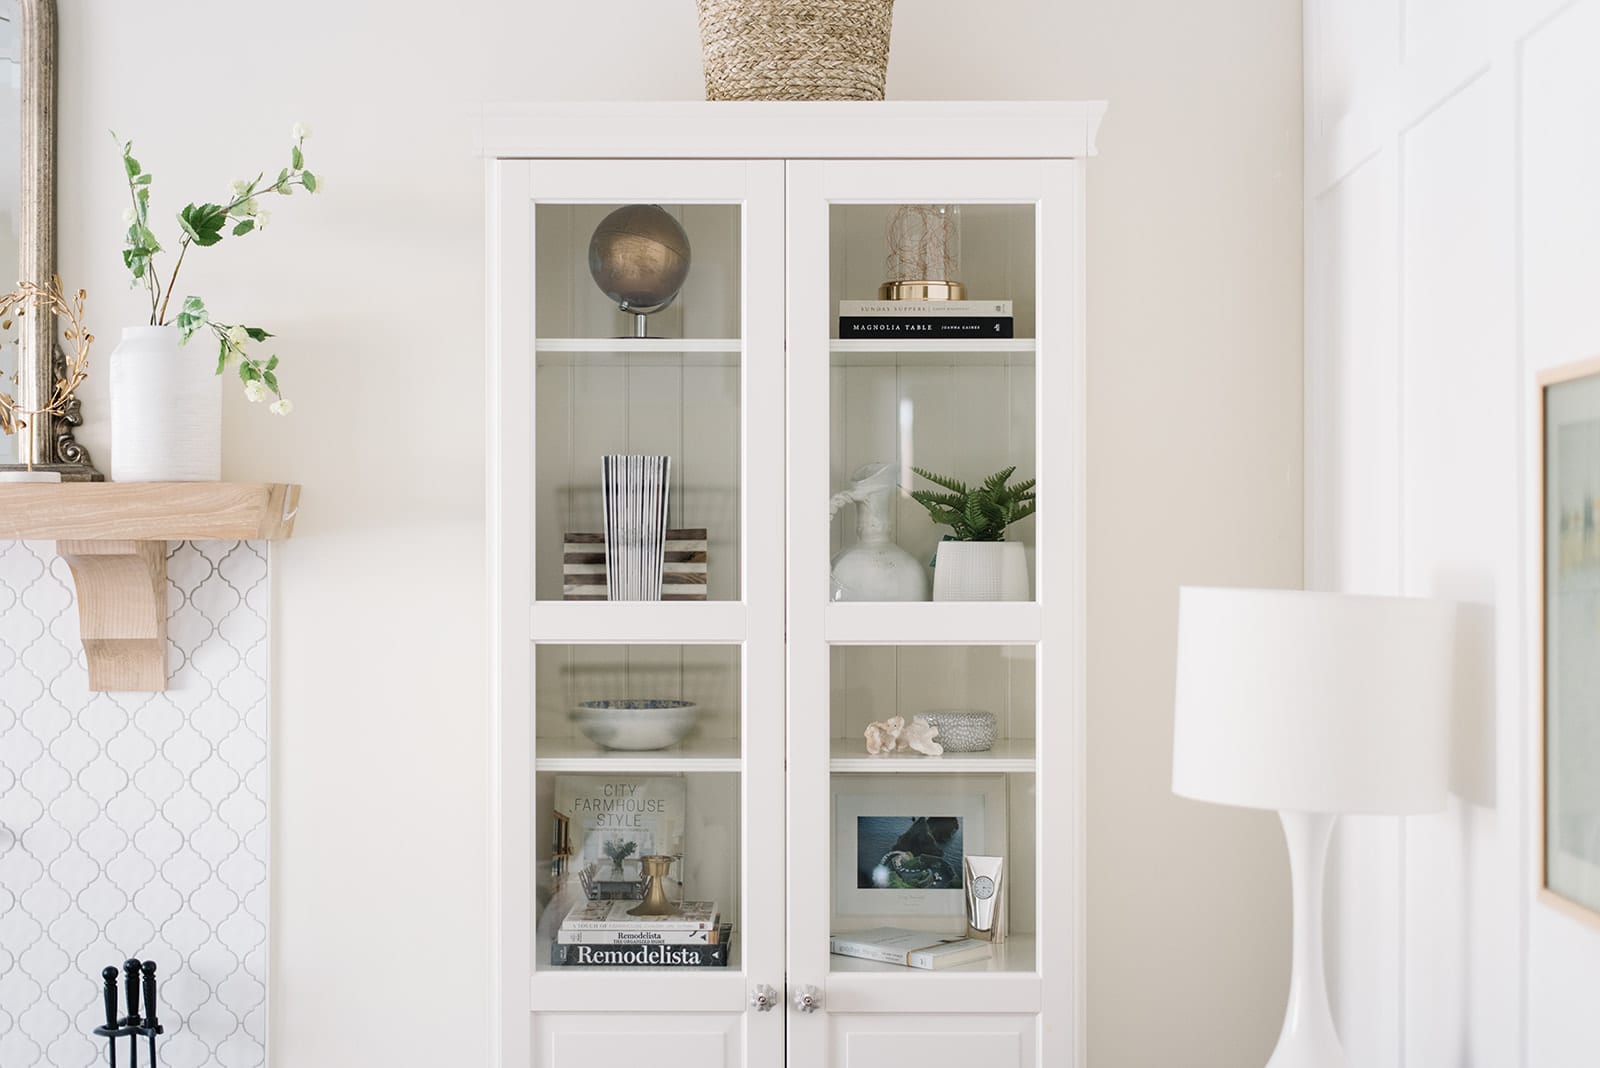 How to style a bookcase - keep it simple and follow the guiding principles of space, unity, and balance.